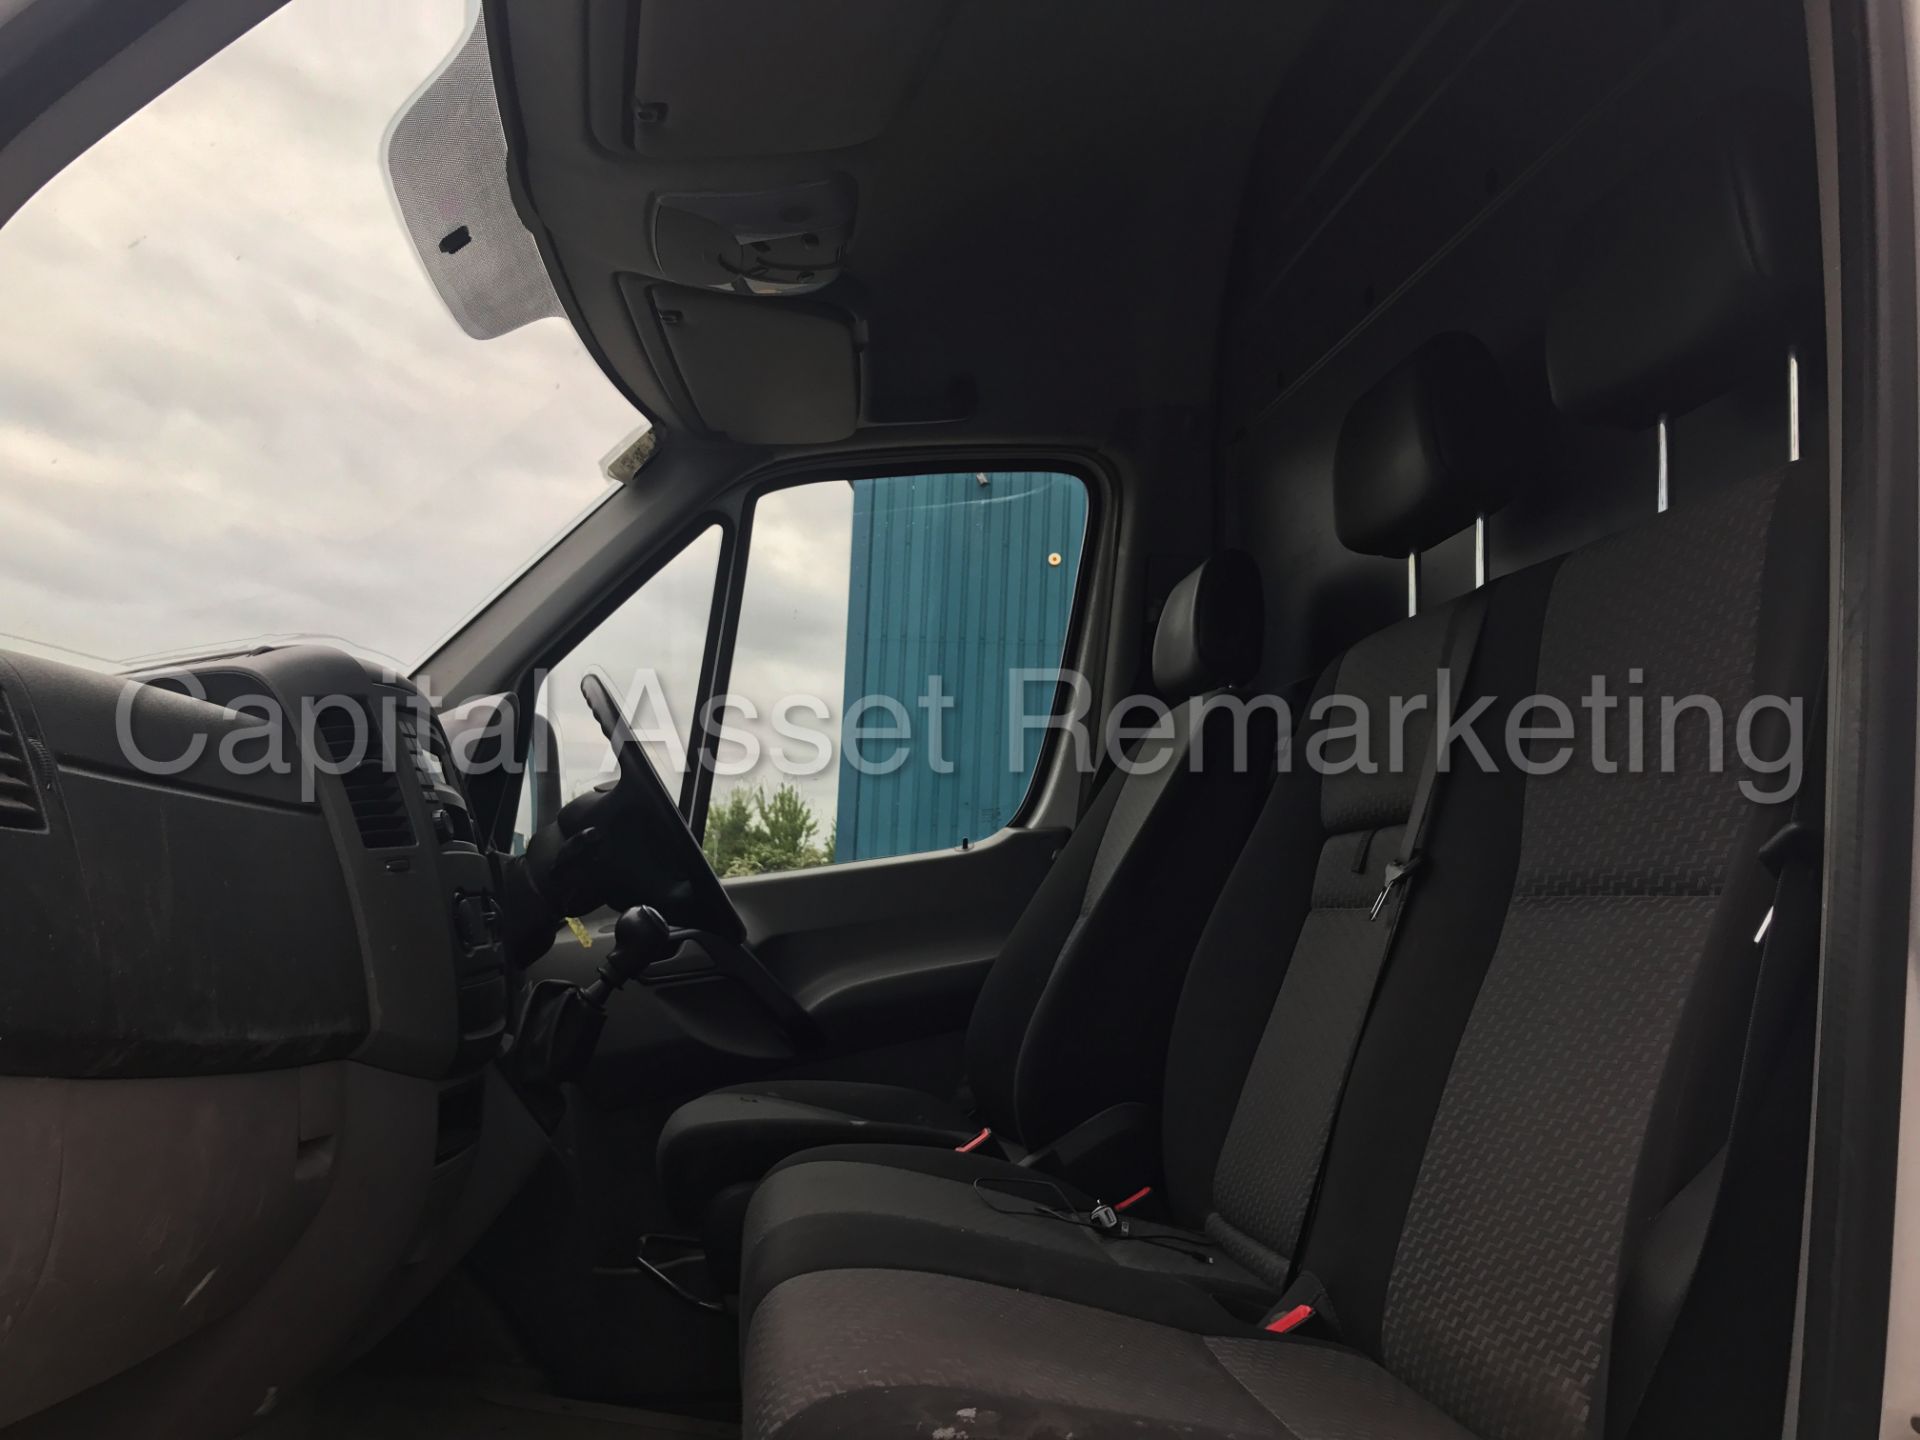 VOLKSWAGEN CRAFTER CR35 'MWB HI-ROOF' (2014) '2.0 TDI - 109 PS - 6 SPEED' *1 COMPANY OWNER FROM NEW* - Image 17 of 19